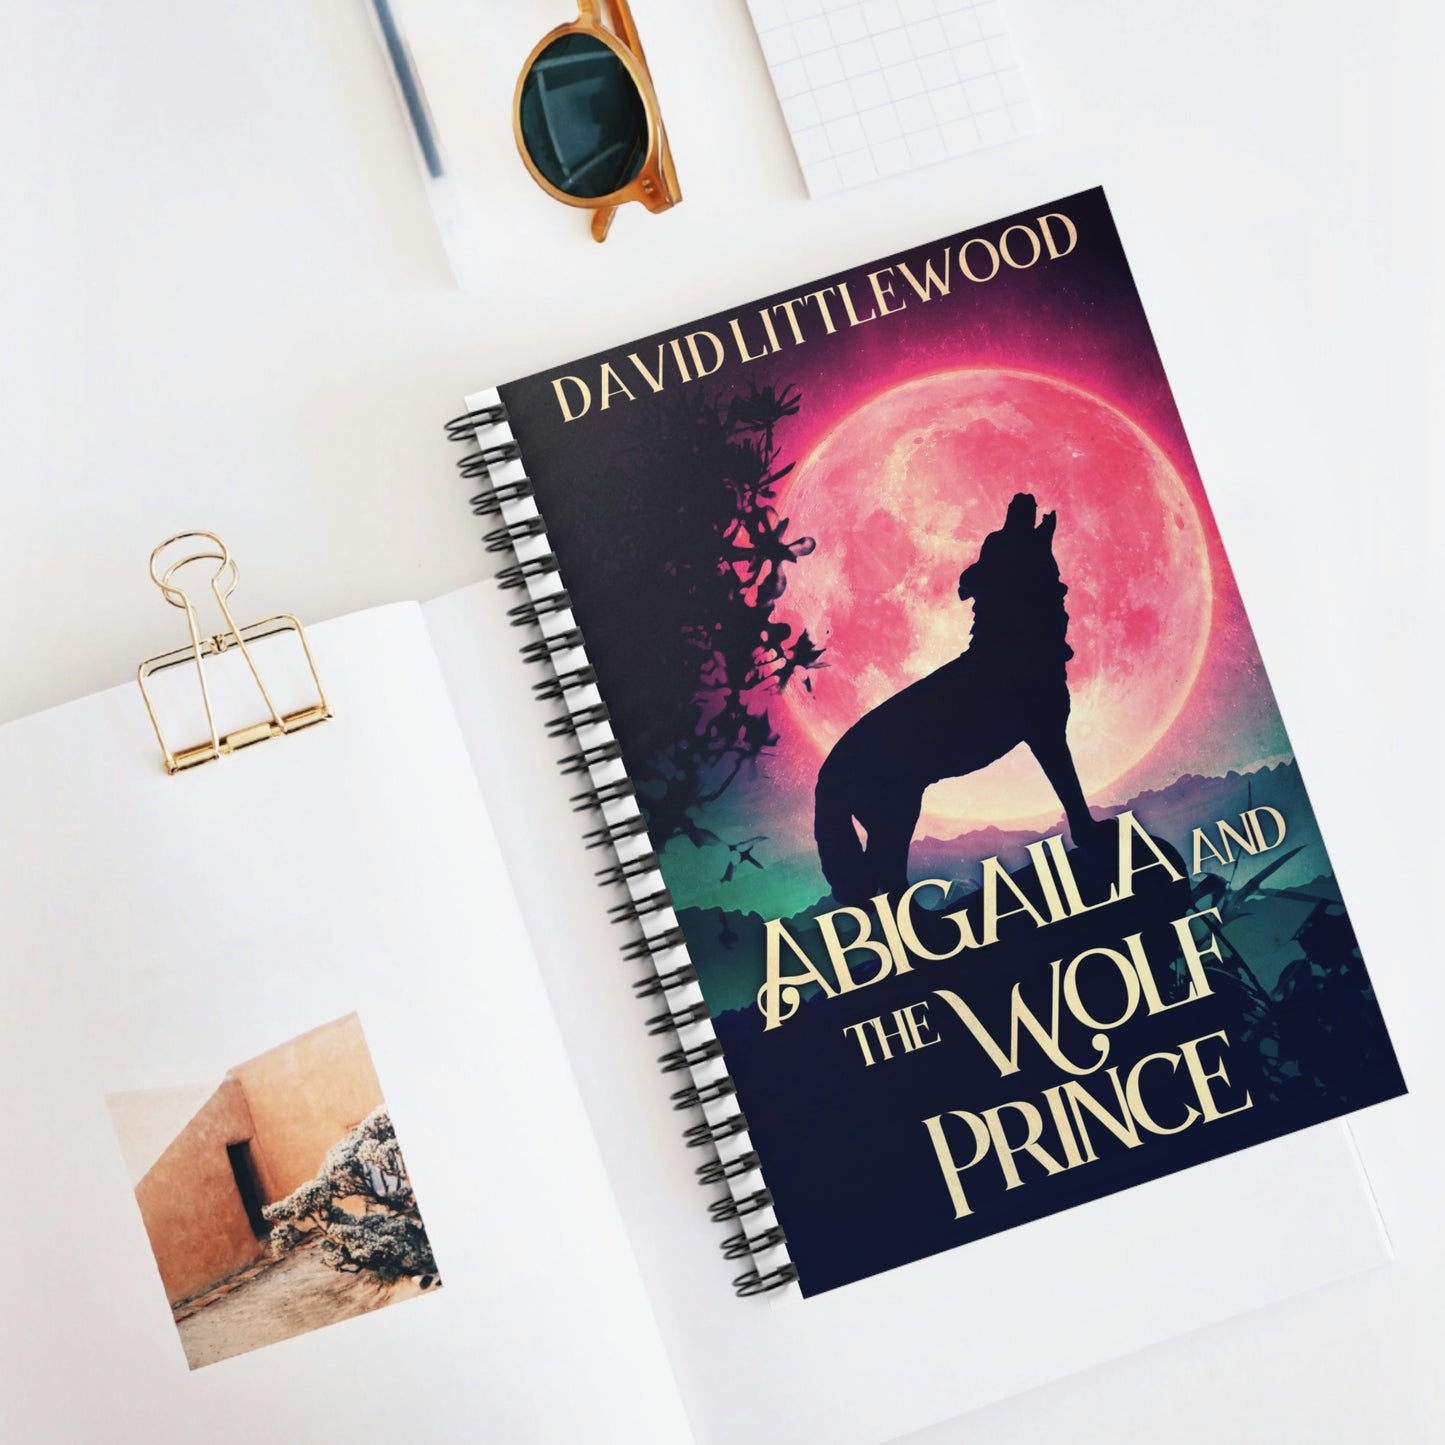 Abigaila And The Wolf Prince - Spiral Notebook